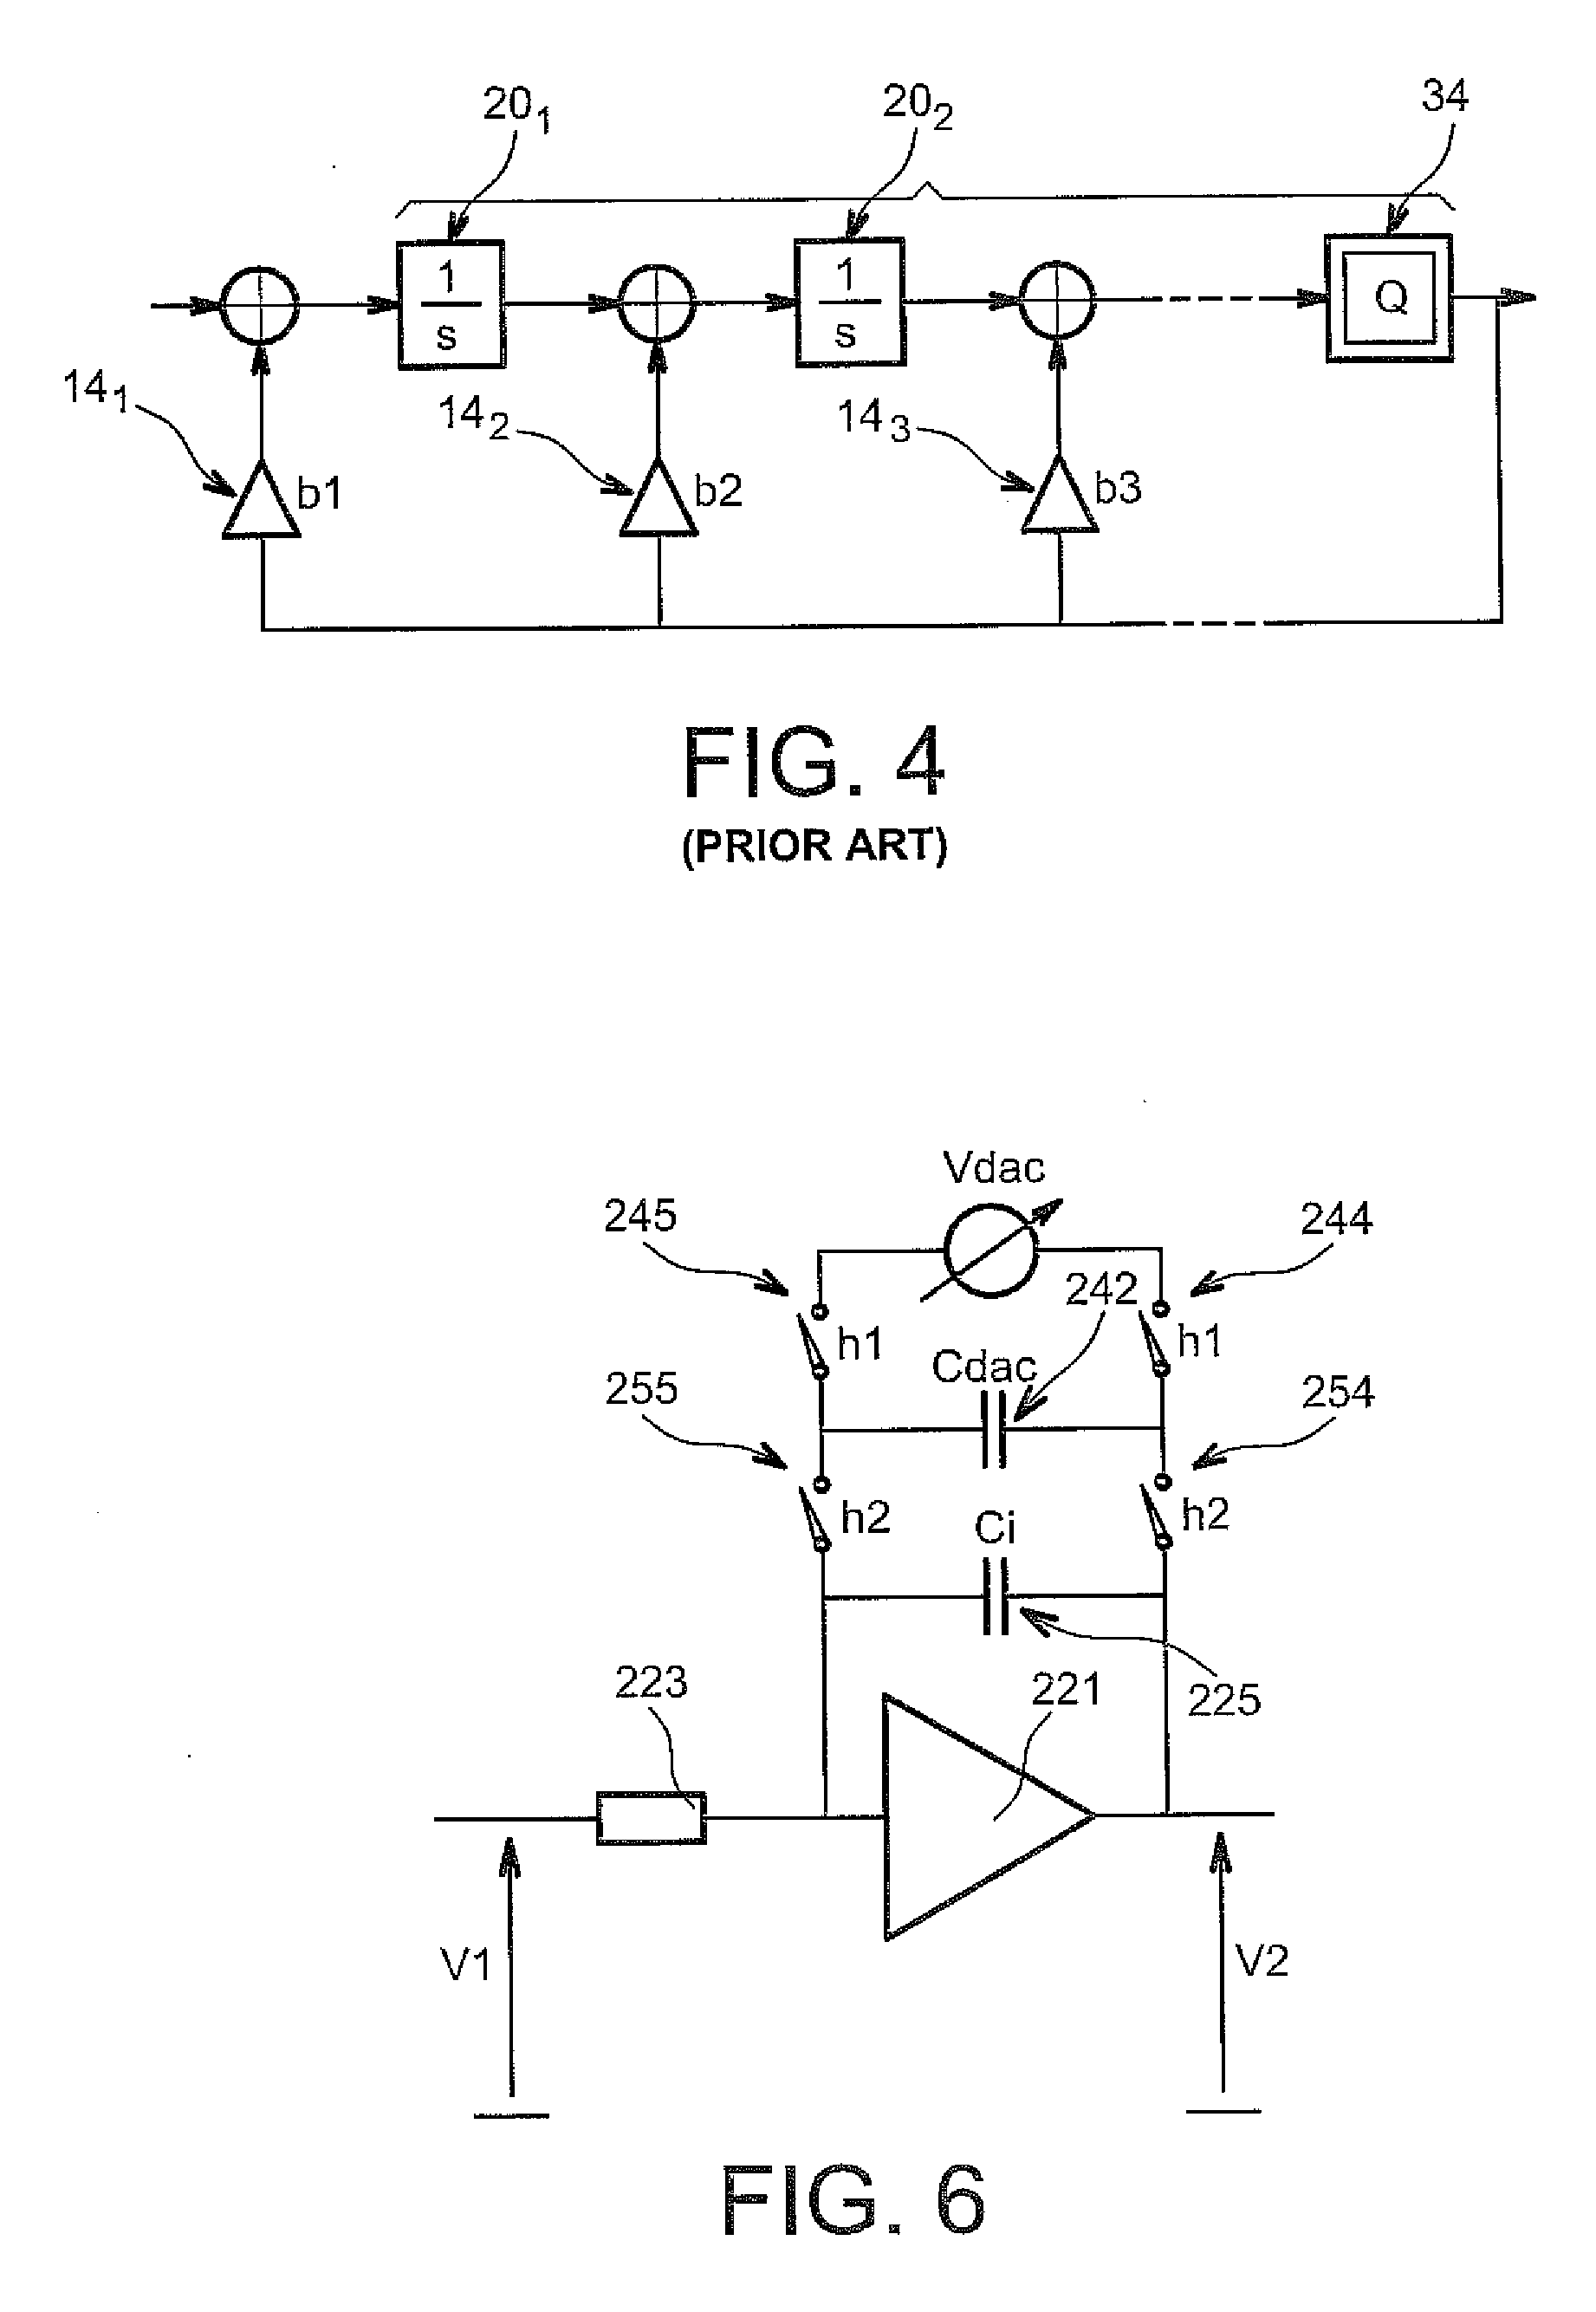 Delta-sigma modulator provided with a charge sharing integrator